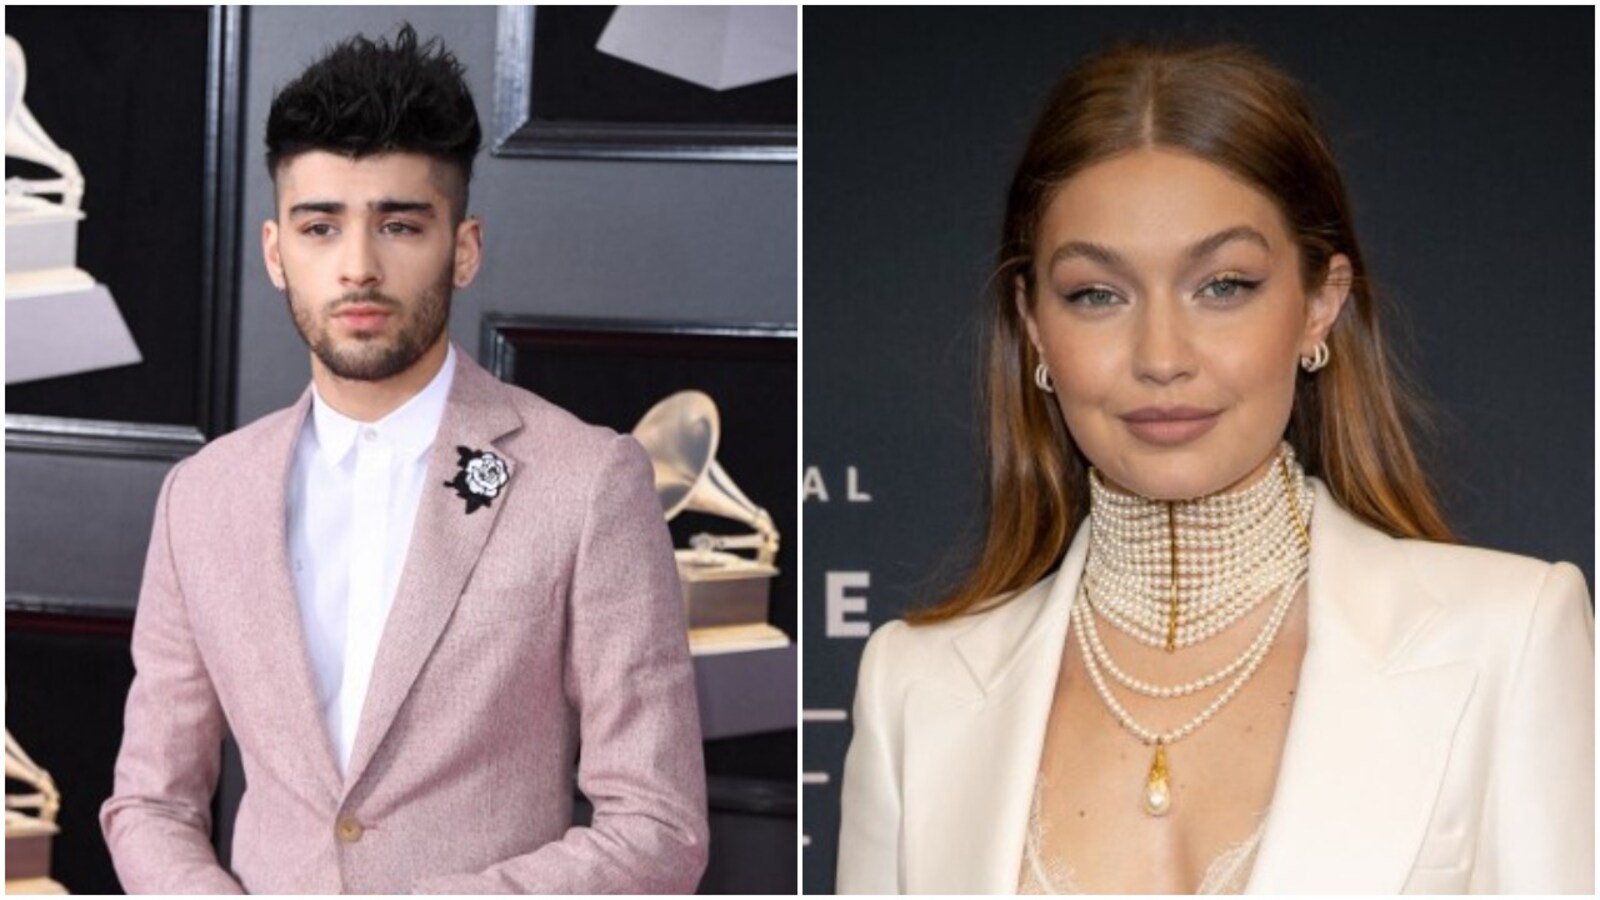 Gigi Hadid Shares Details About Co-Parenting With Zayn Malik